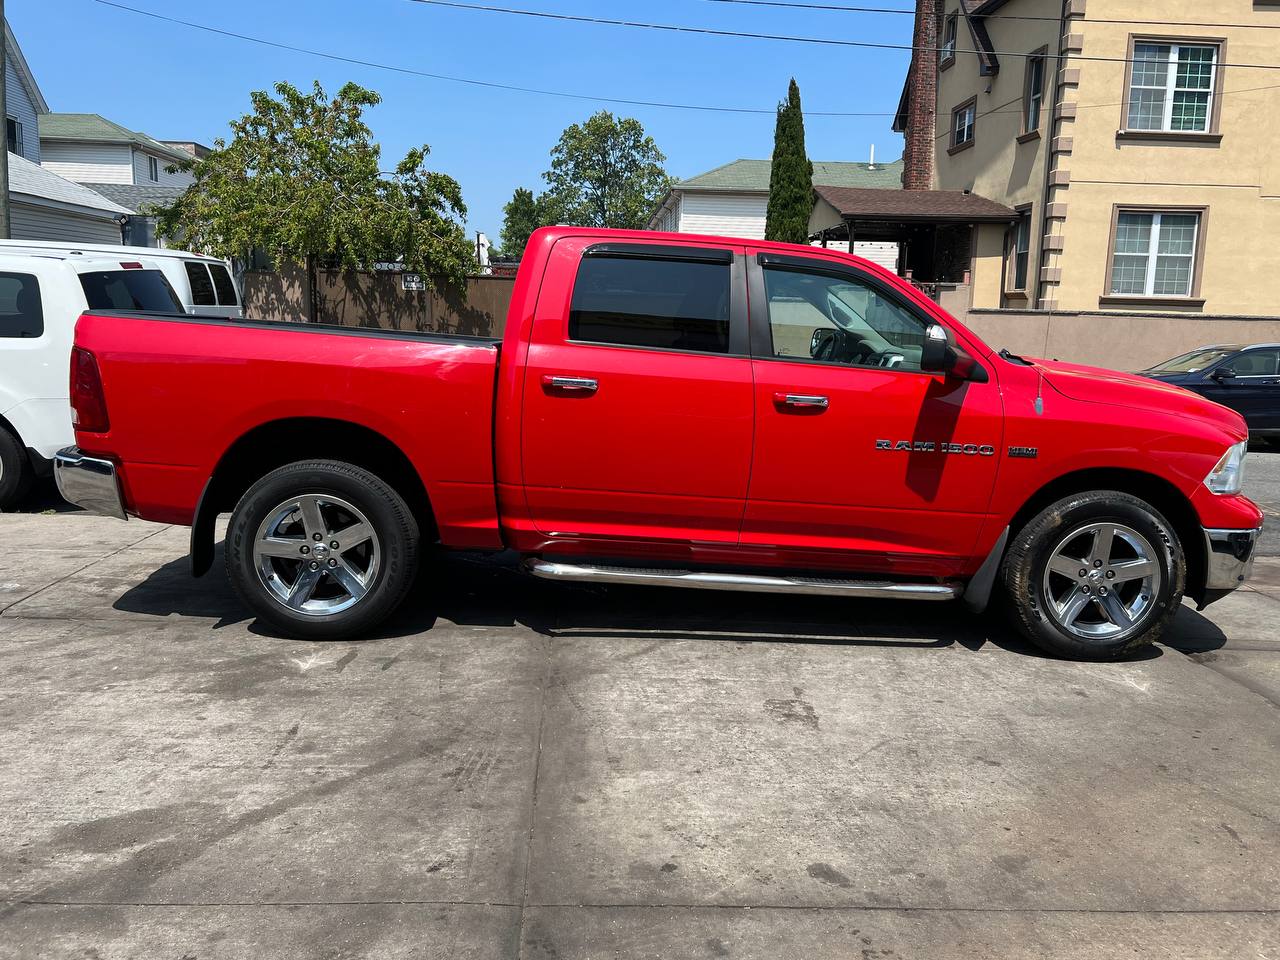 Used - RAM 1500 Big Horn 4x4 Pickup Truck for sale in Staten Island NY